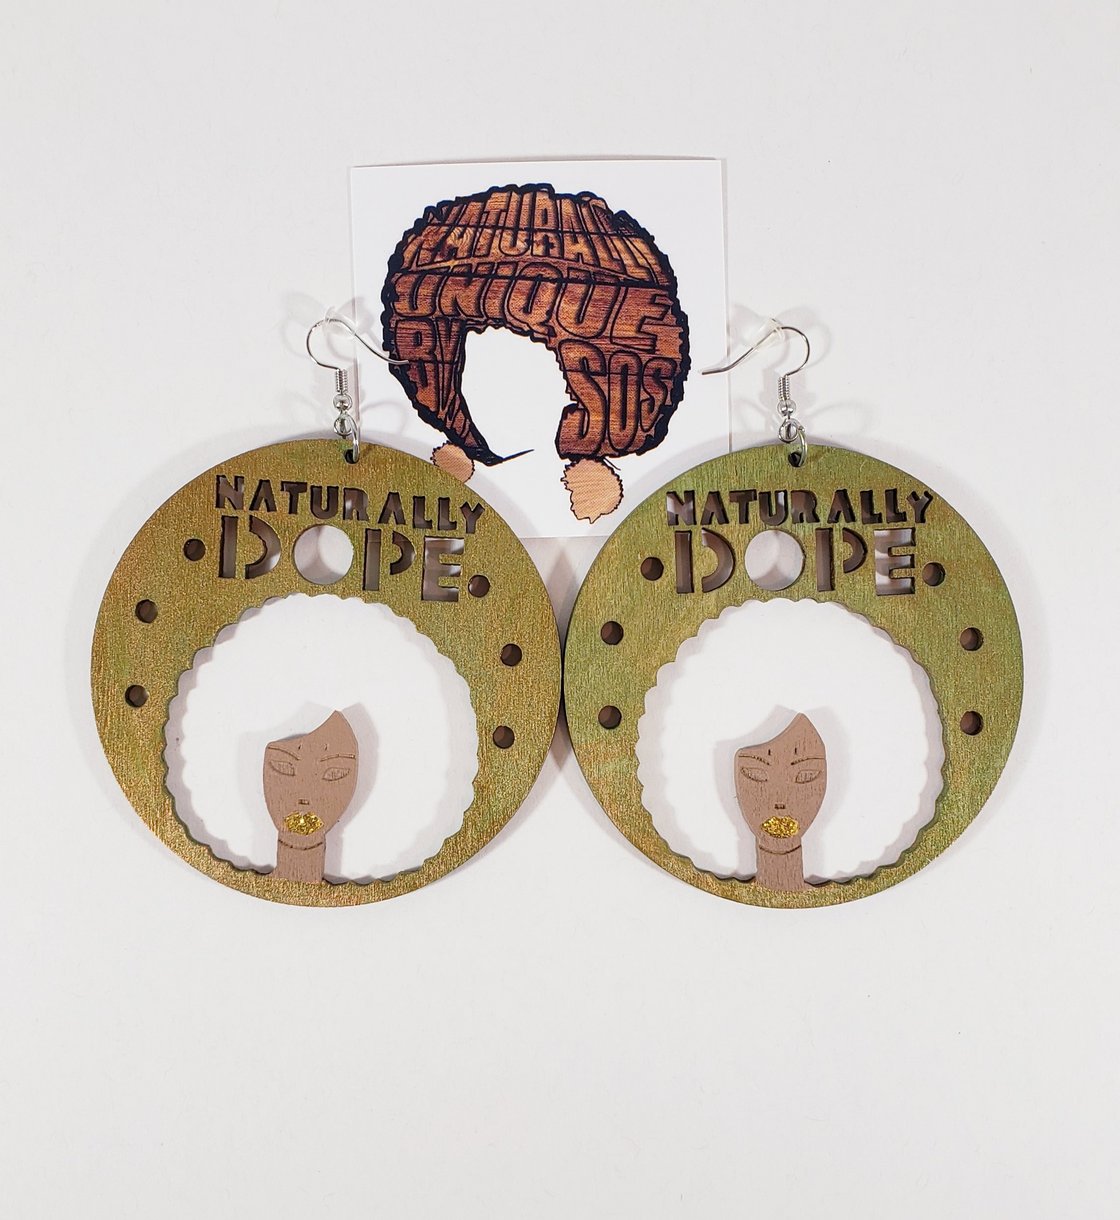 Image of Naturally Dope Earrings